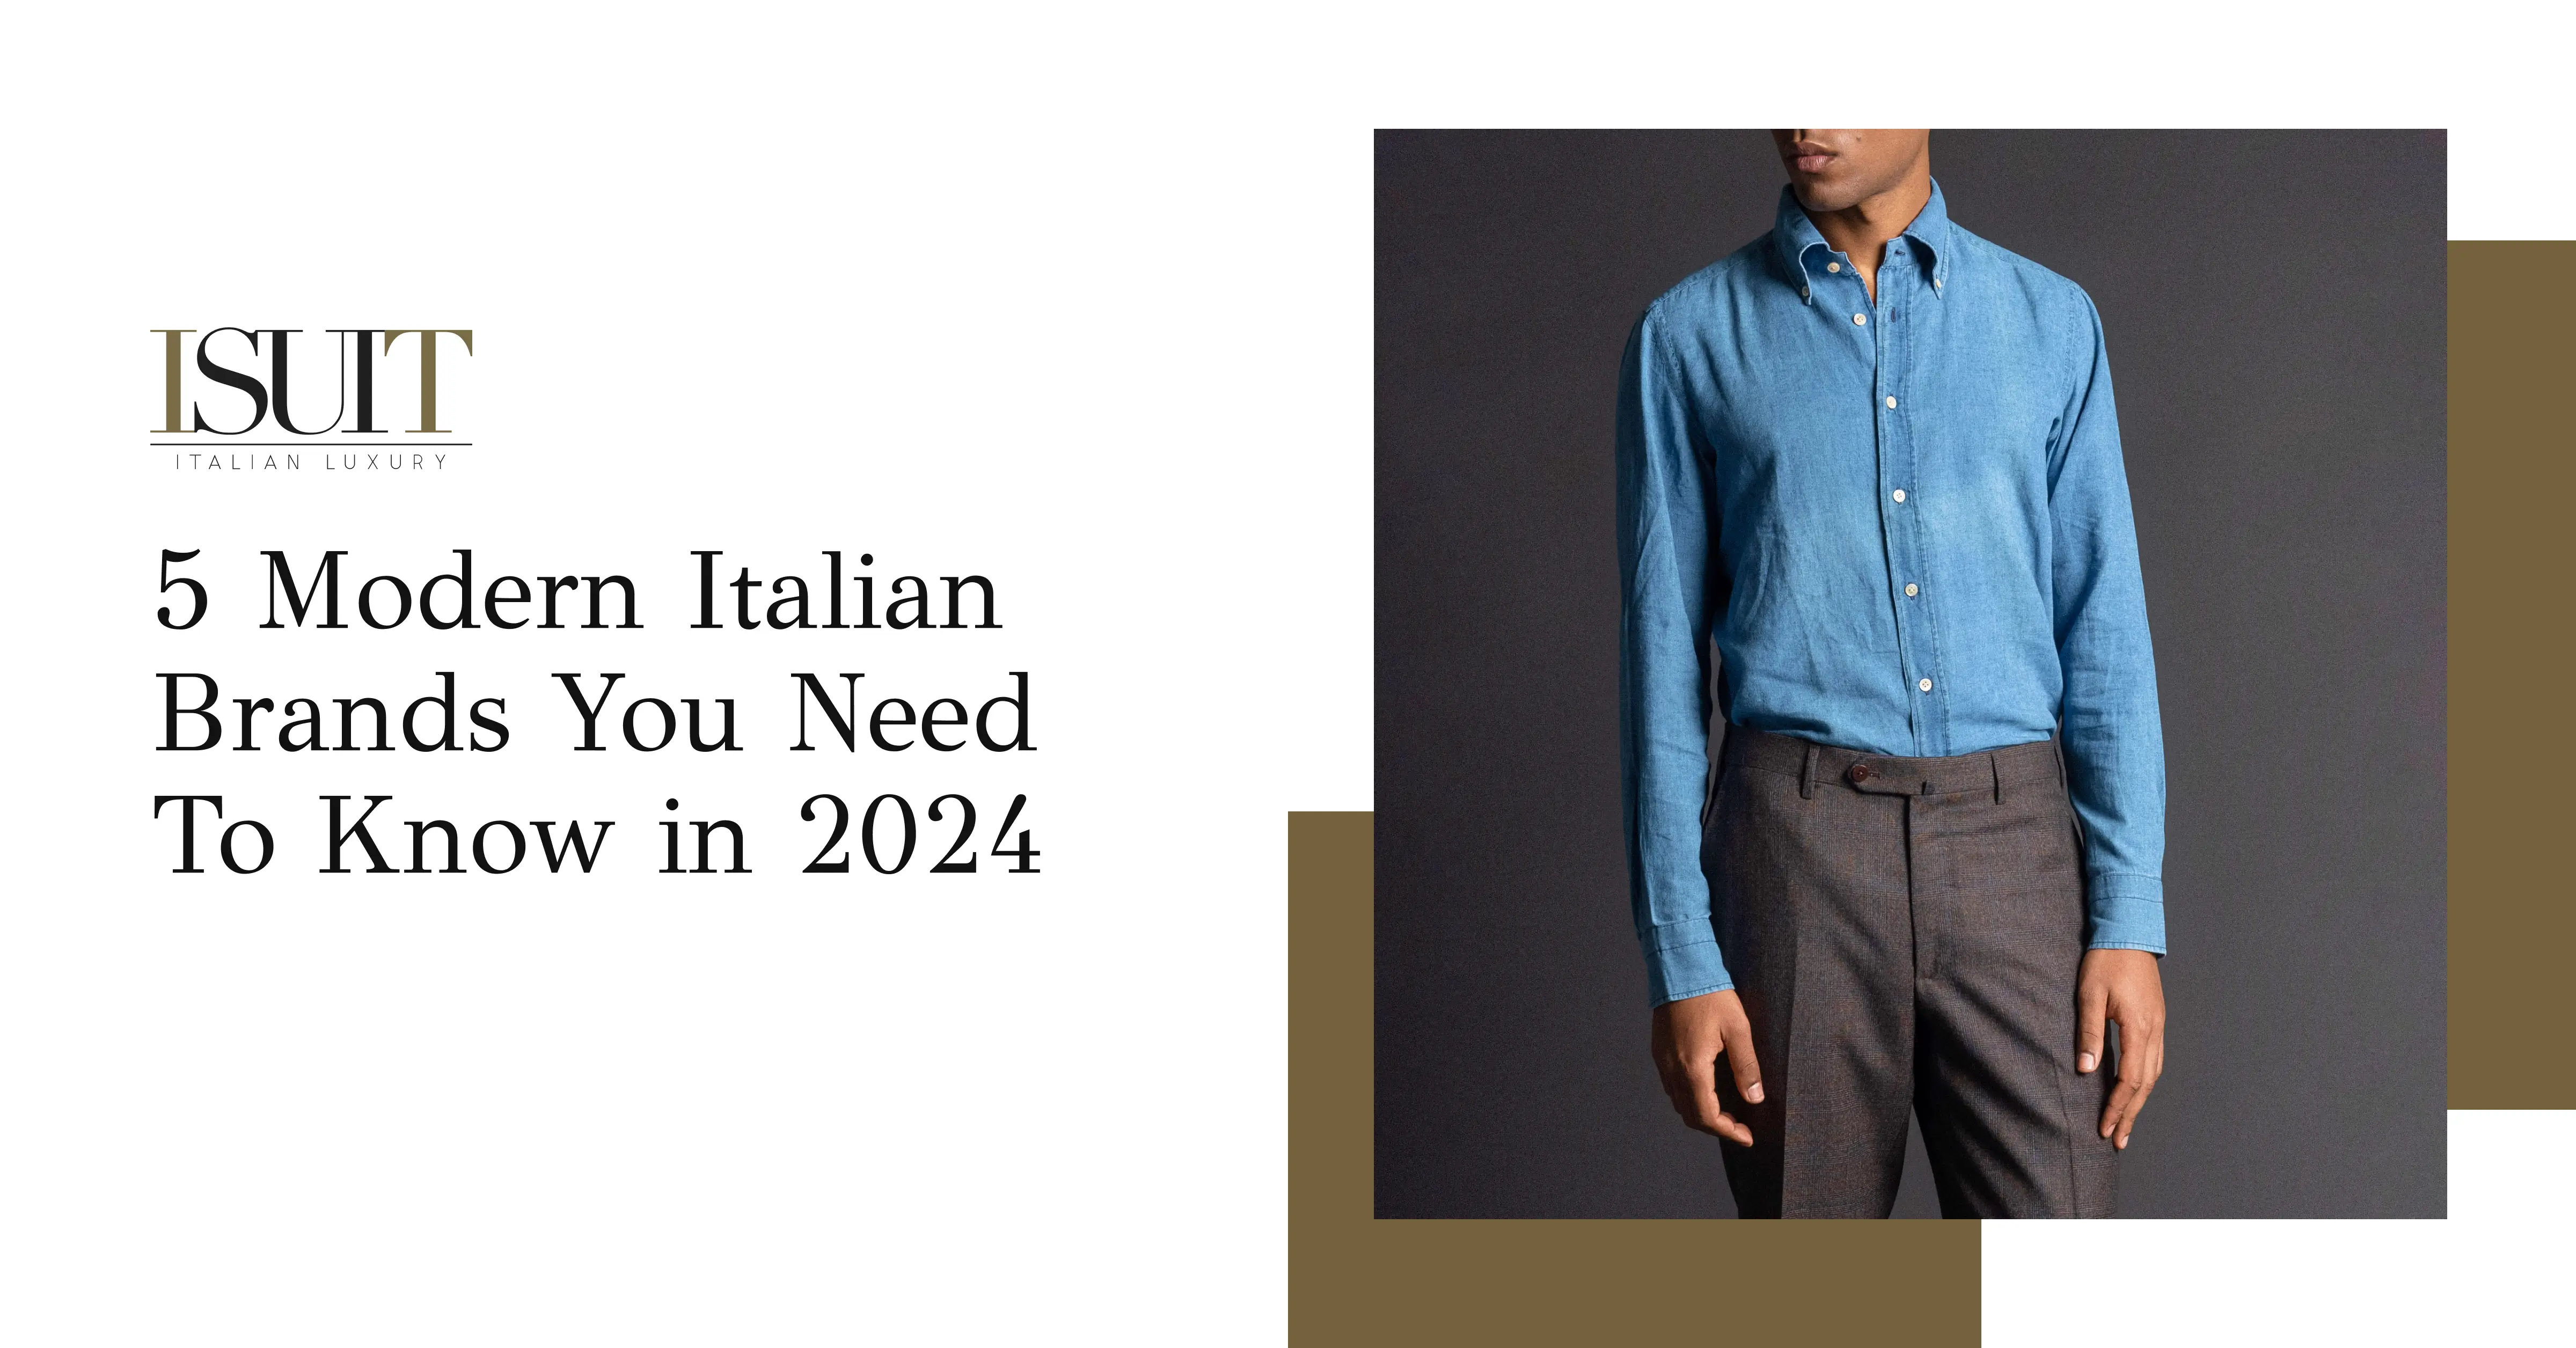 5 Modern Italian Brands You Need To Know in 2024